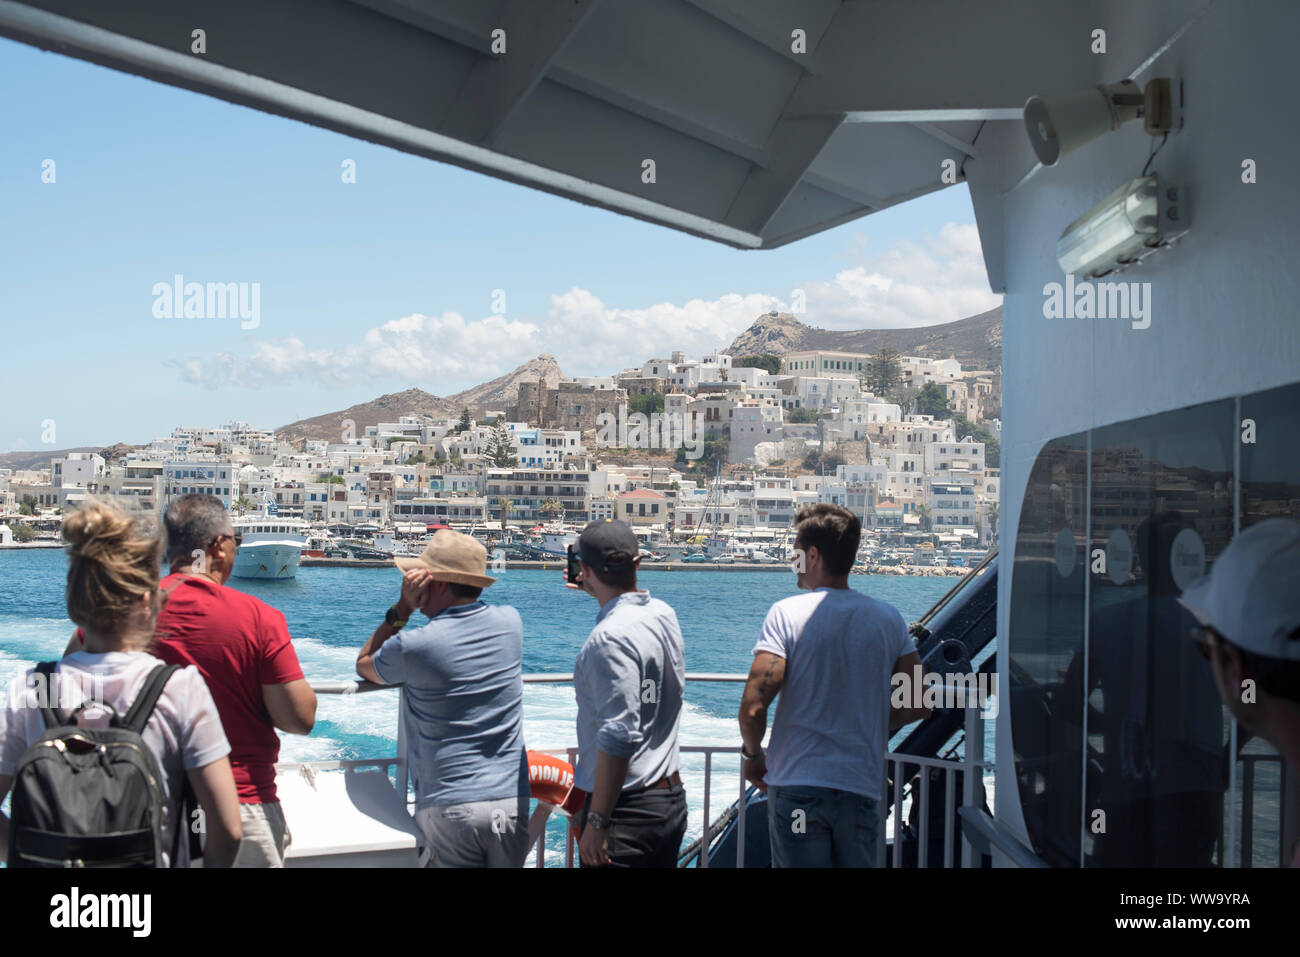 Naxos, Greece - June 28, 2018: The town of Naxos in the distance as a ferry pulls out of the Port of Naxos. Stock Photo